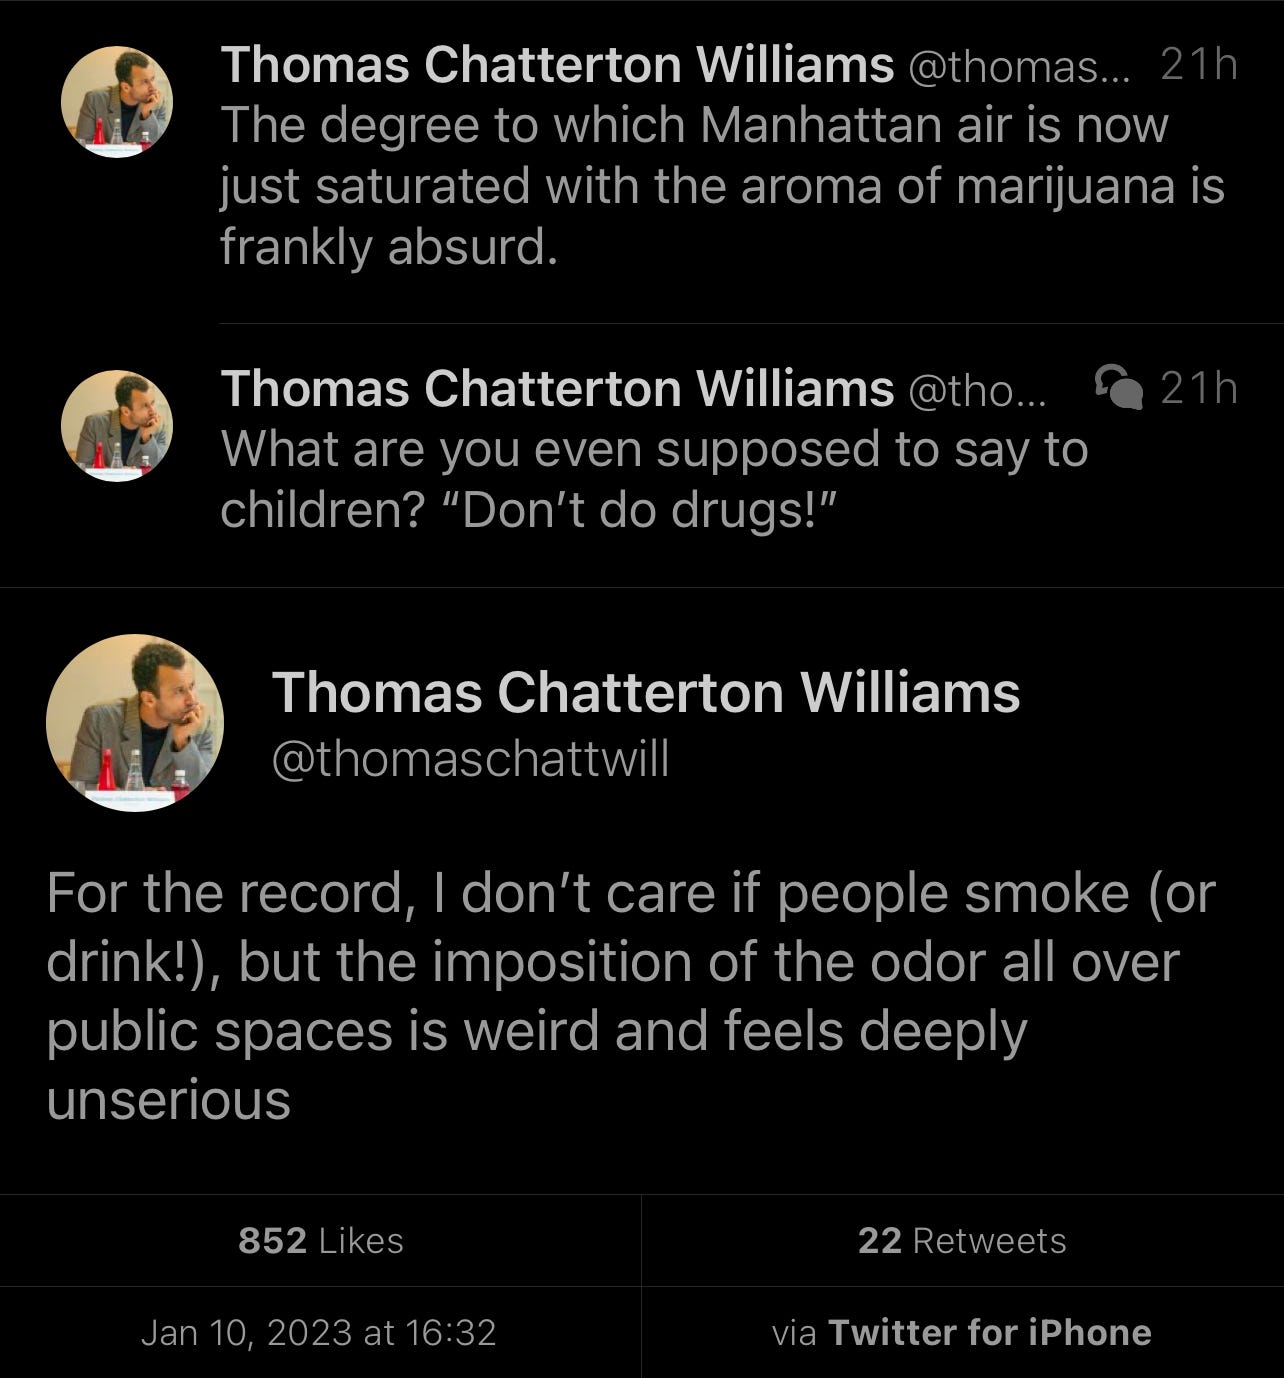 Three tweet thread by Thomas Chatterton Williams: “The degree to which Manhattan air is now just saturated with the aroma of marijuana is frankly absurd.” “What are you even supposed to say to children? “Don’t do drugs!”” “For the record, I don’t care if people smoke (or drink!), but the imposition of the odor all over public spaces is weird and feels deeply unserious”